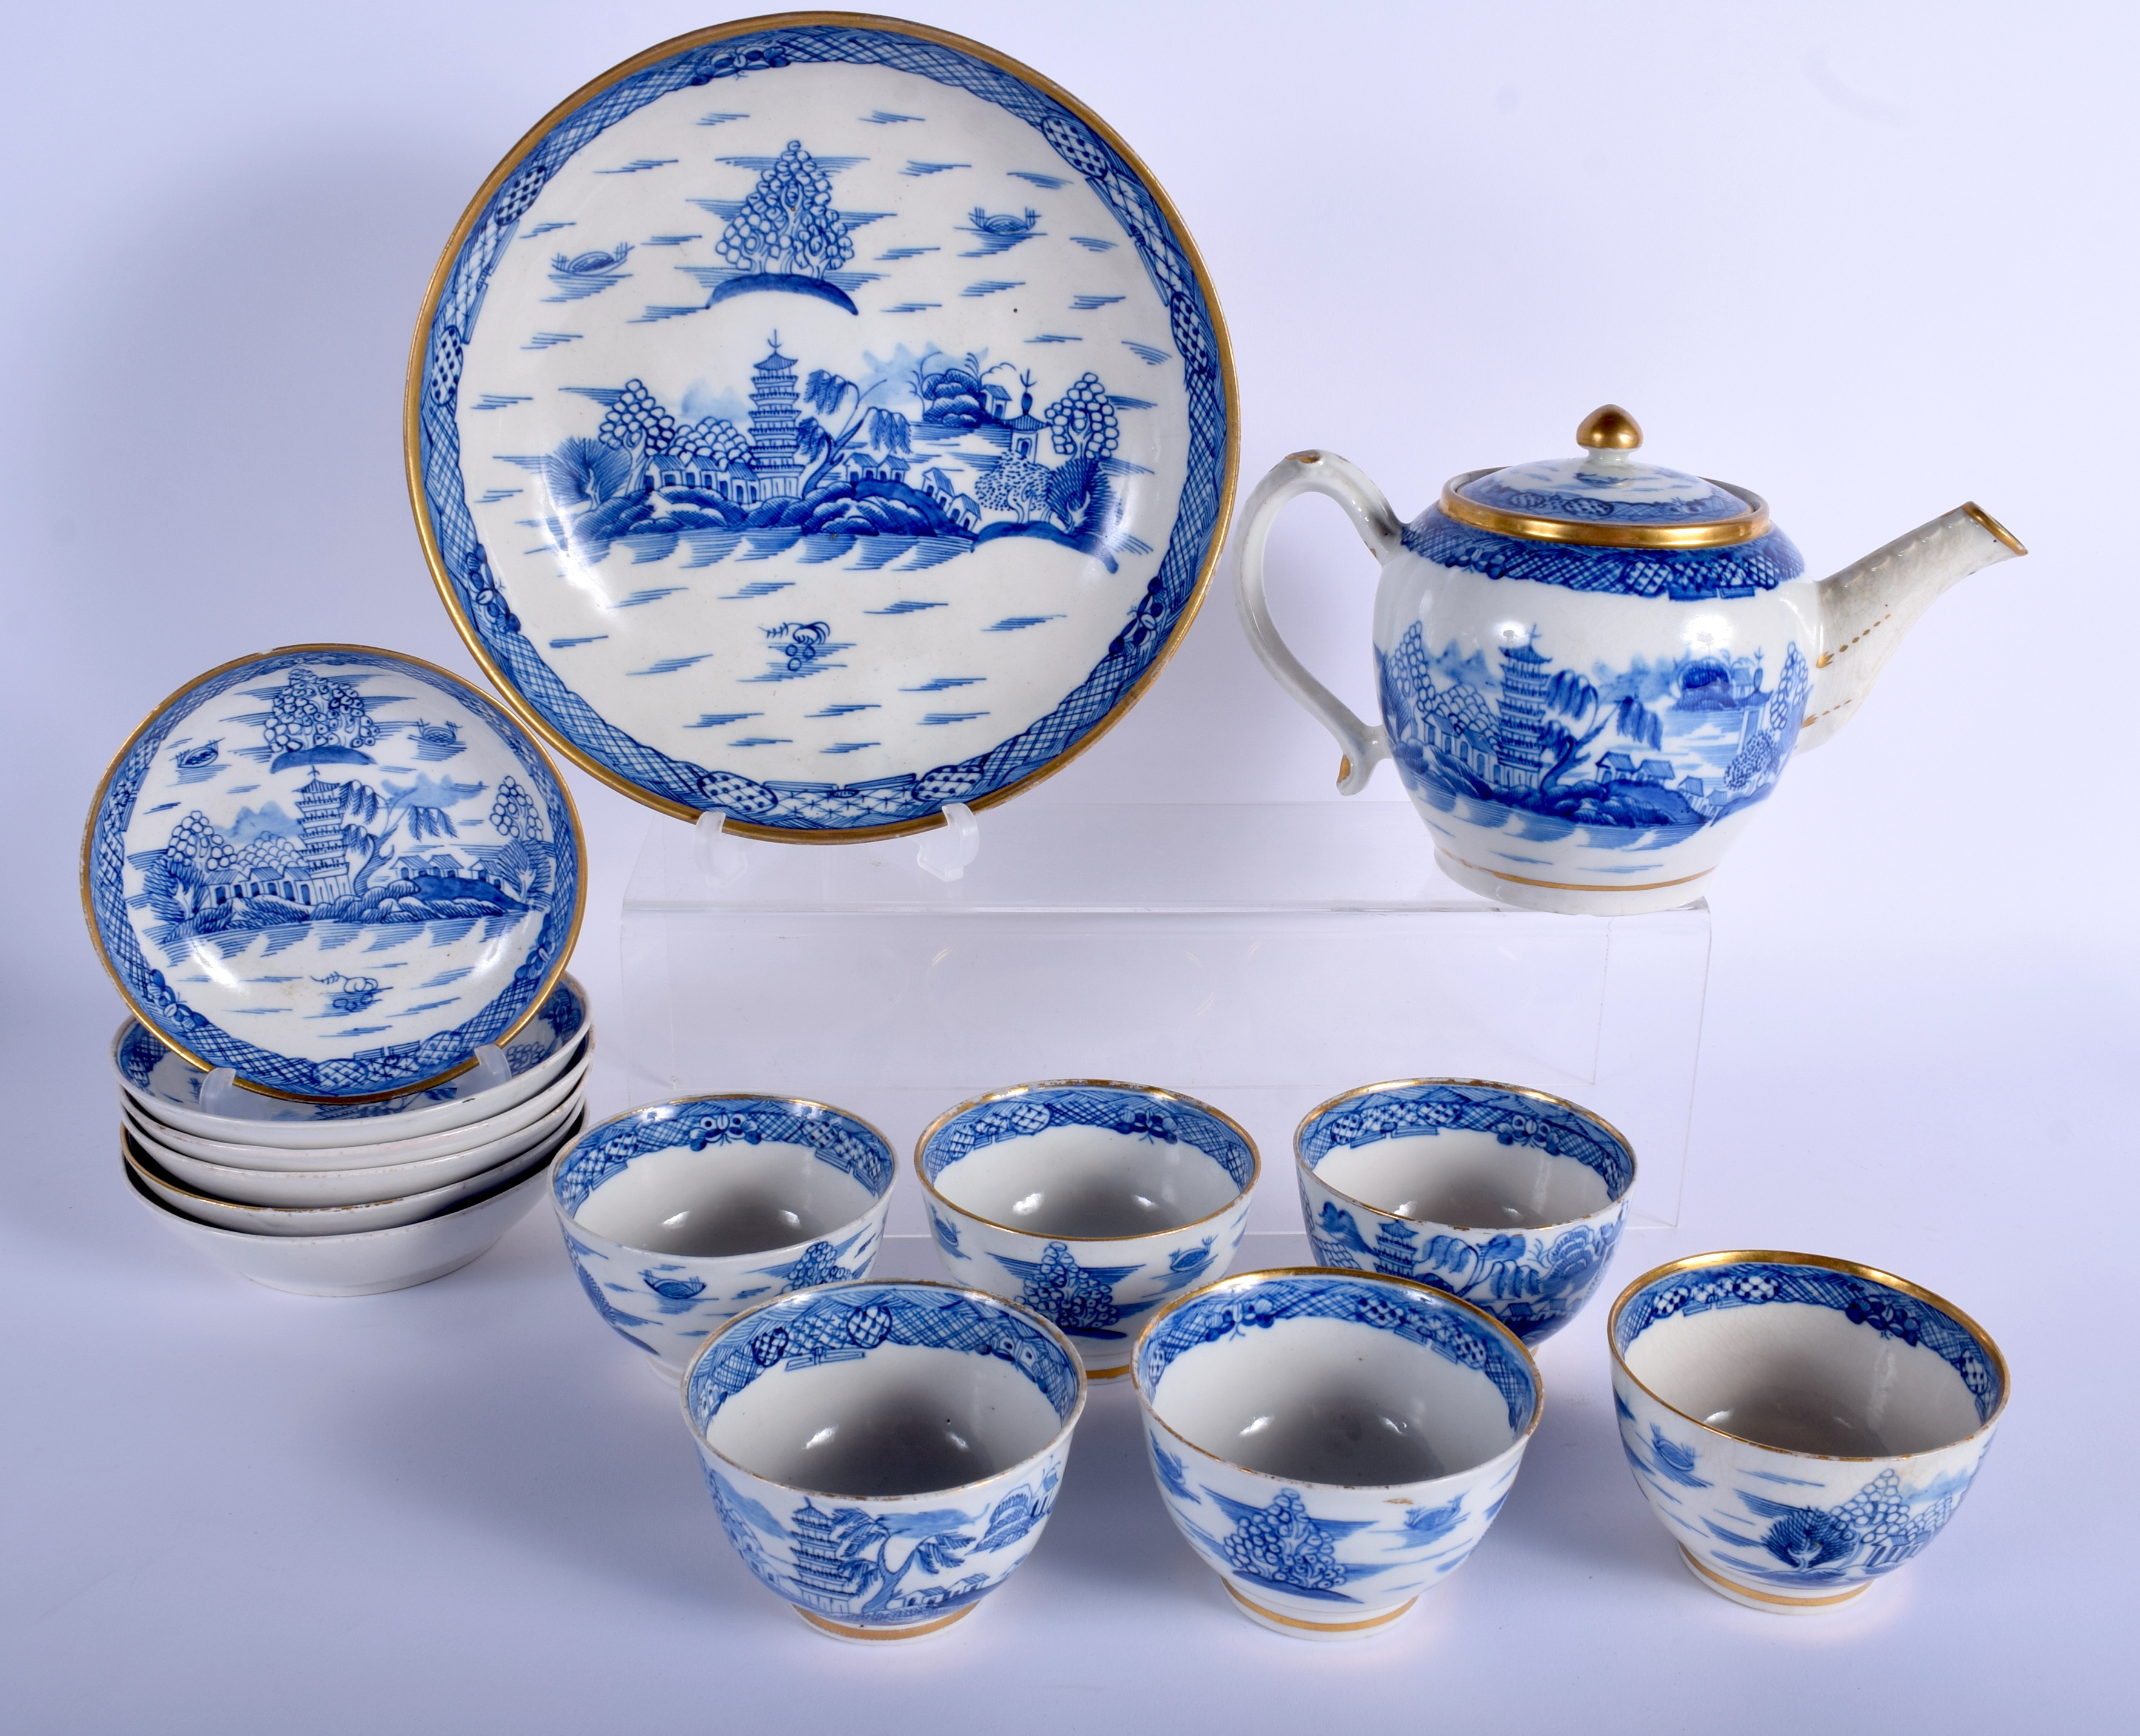 AN EARLY 19TH CENTURY ENGLISH PEARLWARE TEASET painted with landscapes. Largest 24 cm wide. (14)